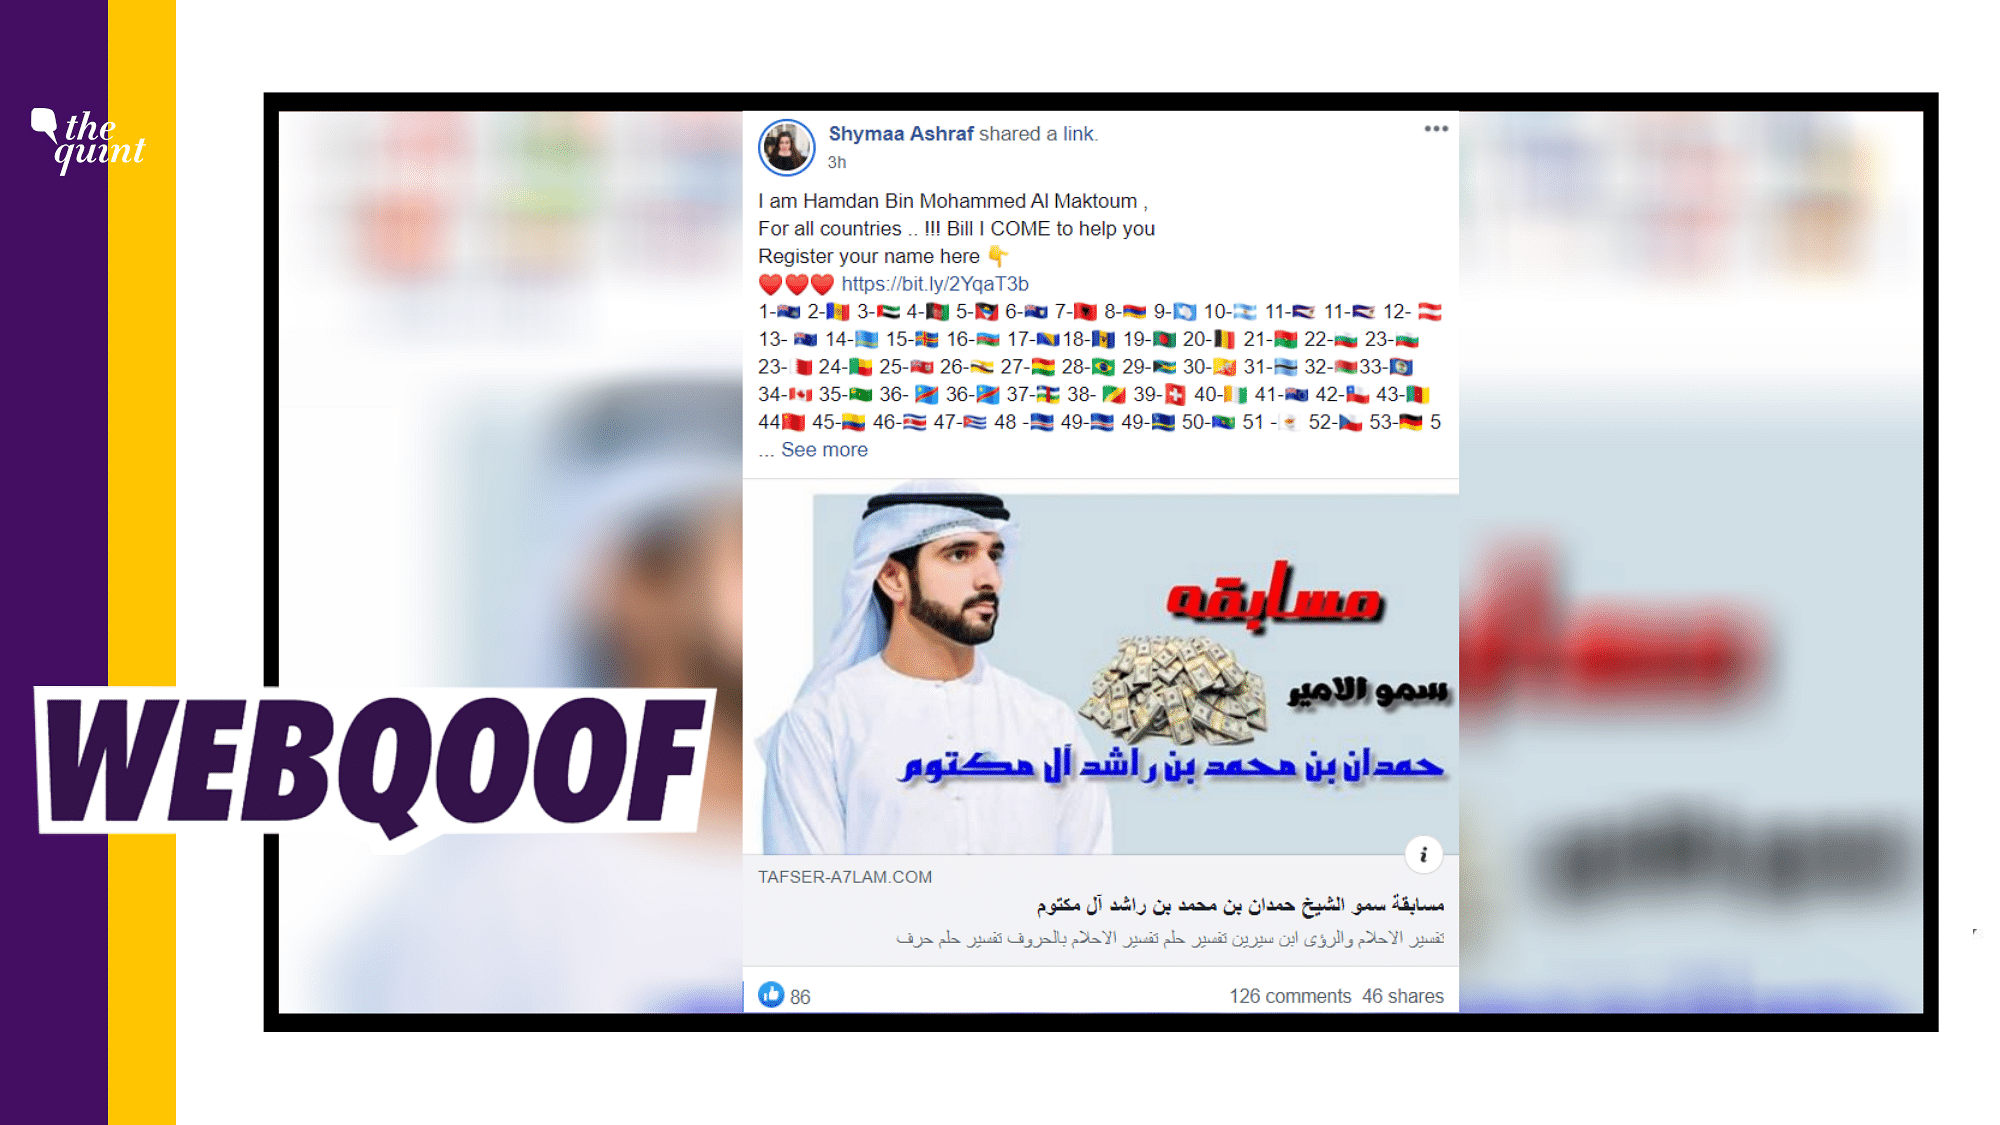 A spam message has been shared massively on Facebook to gain clicks on Google ads in the guise of a COVID-19 charity by the UAE crown prince.